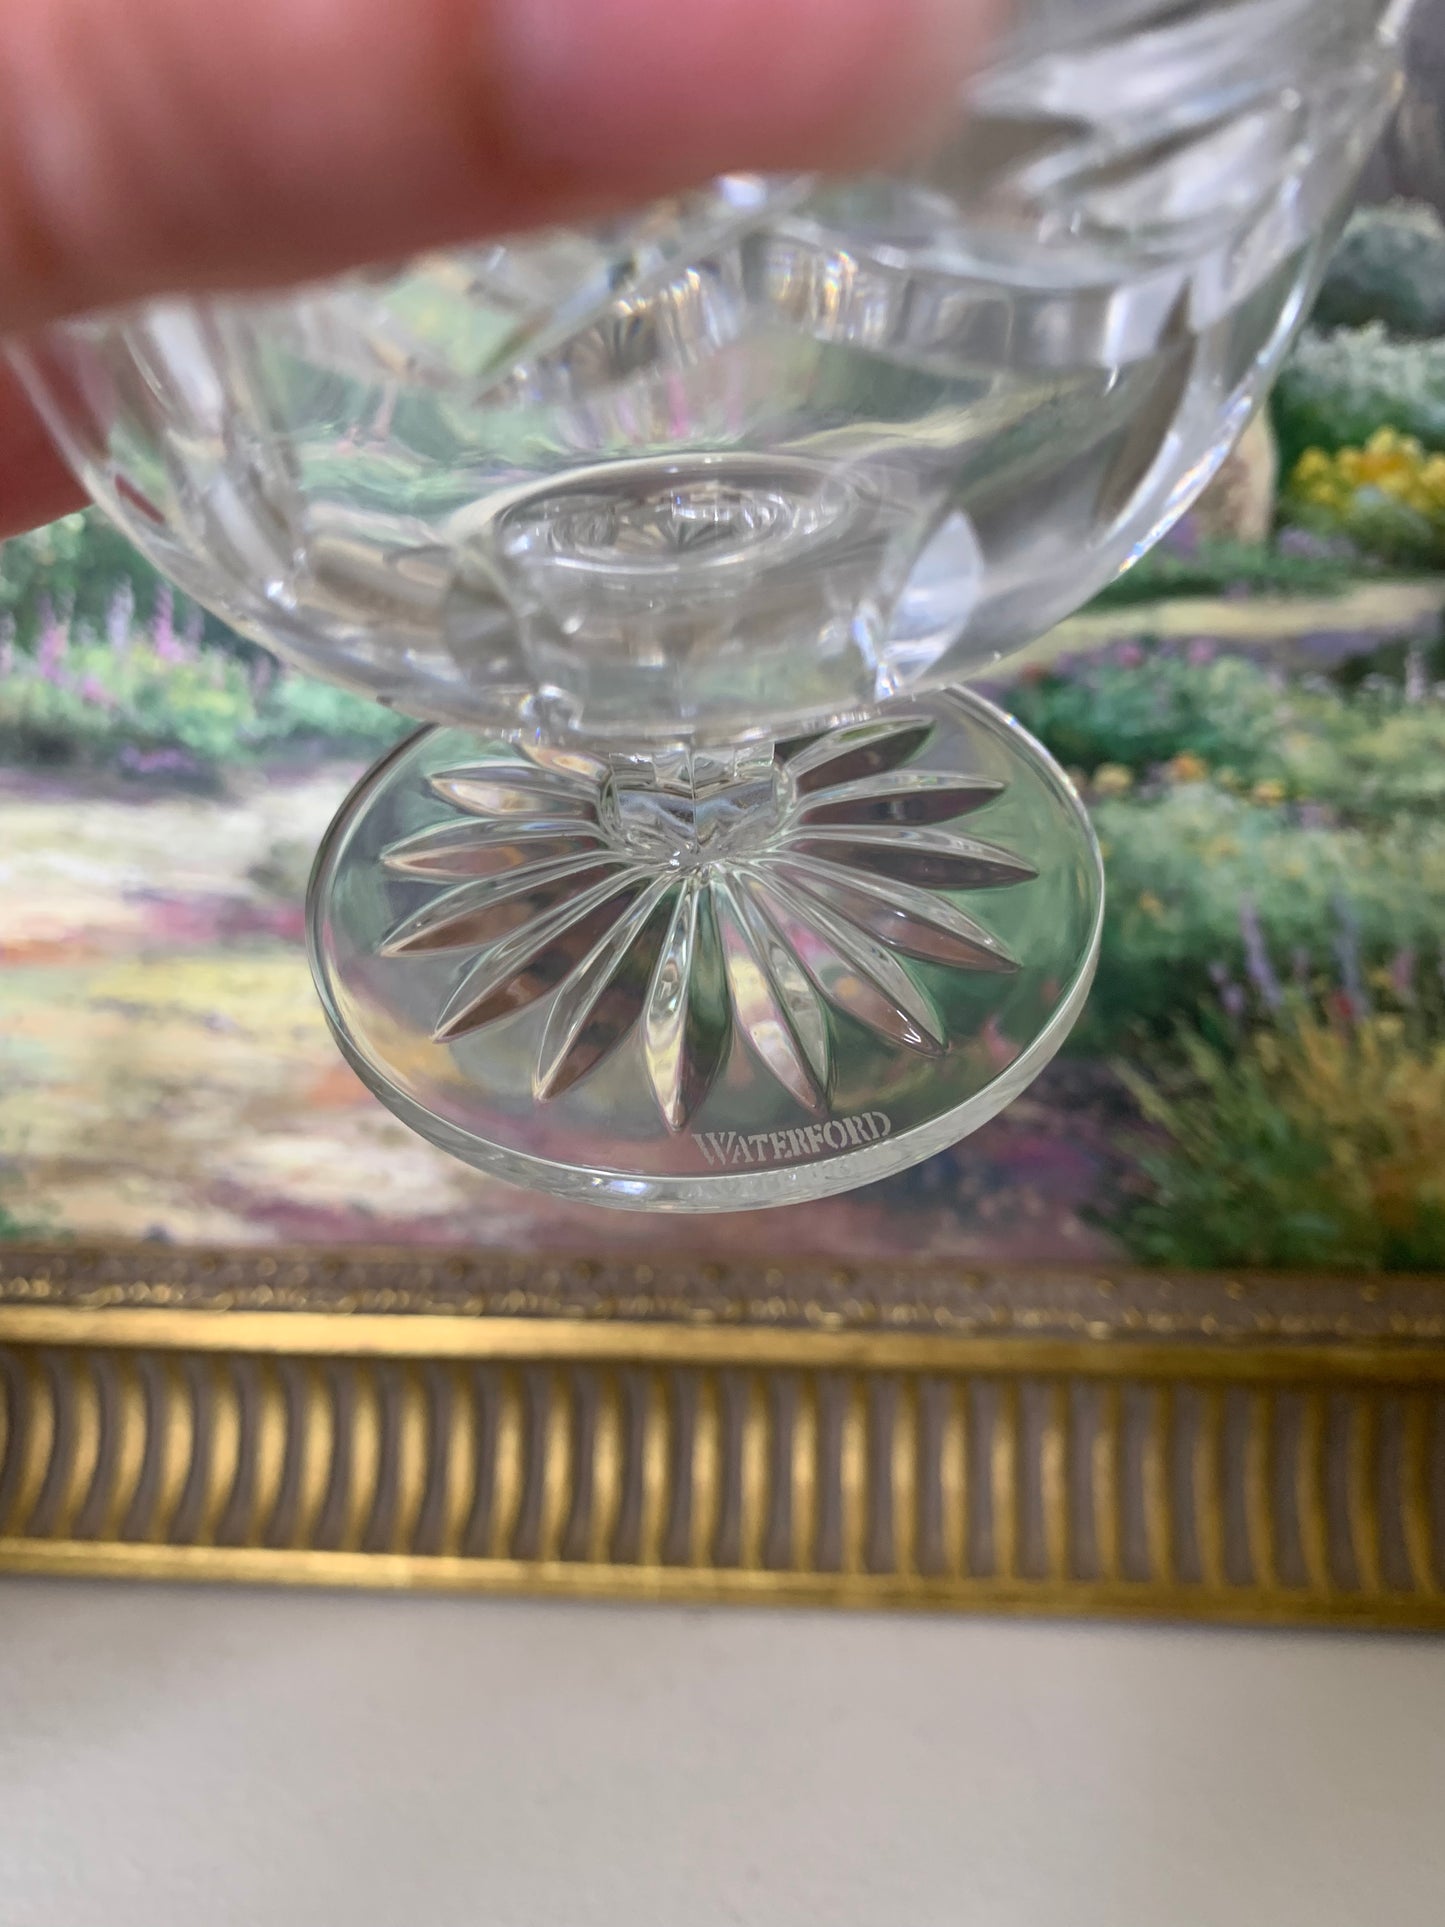 Stunning Waterford crystal Dolmen 5” footed bowl/compote - Excellent condition!